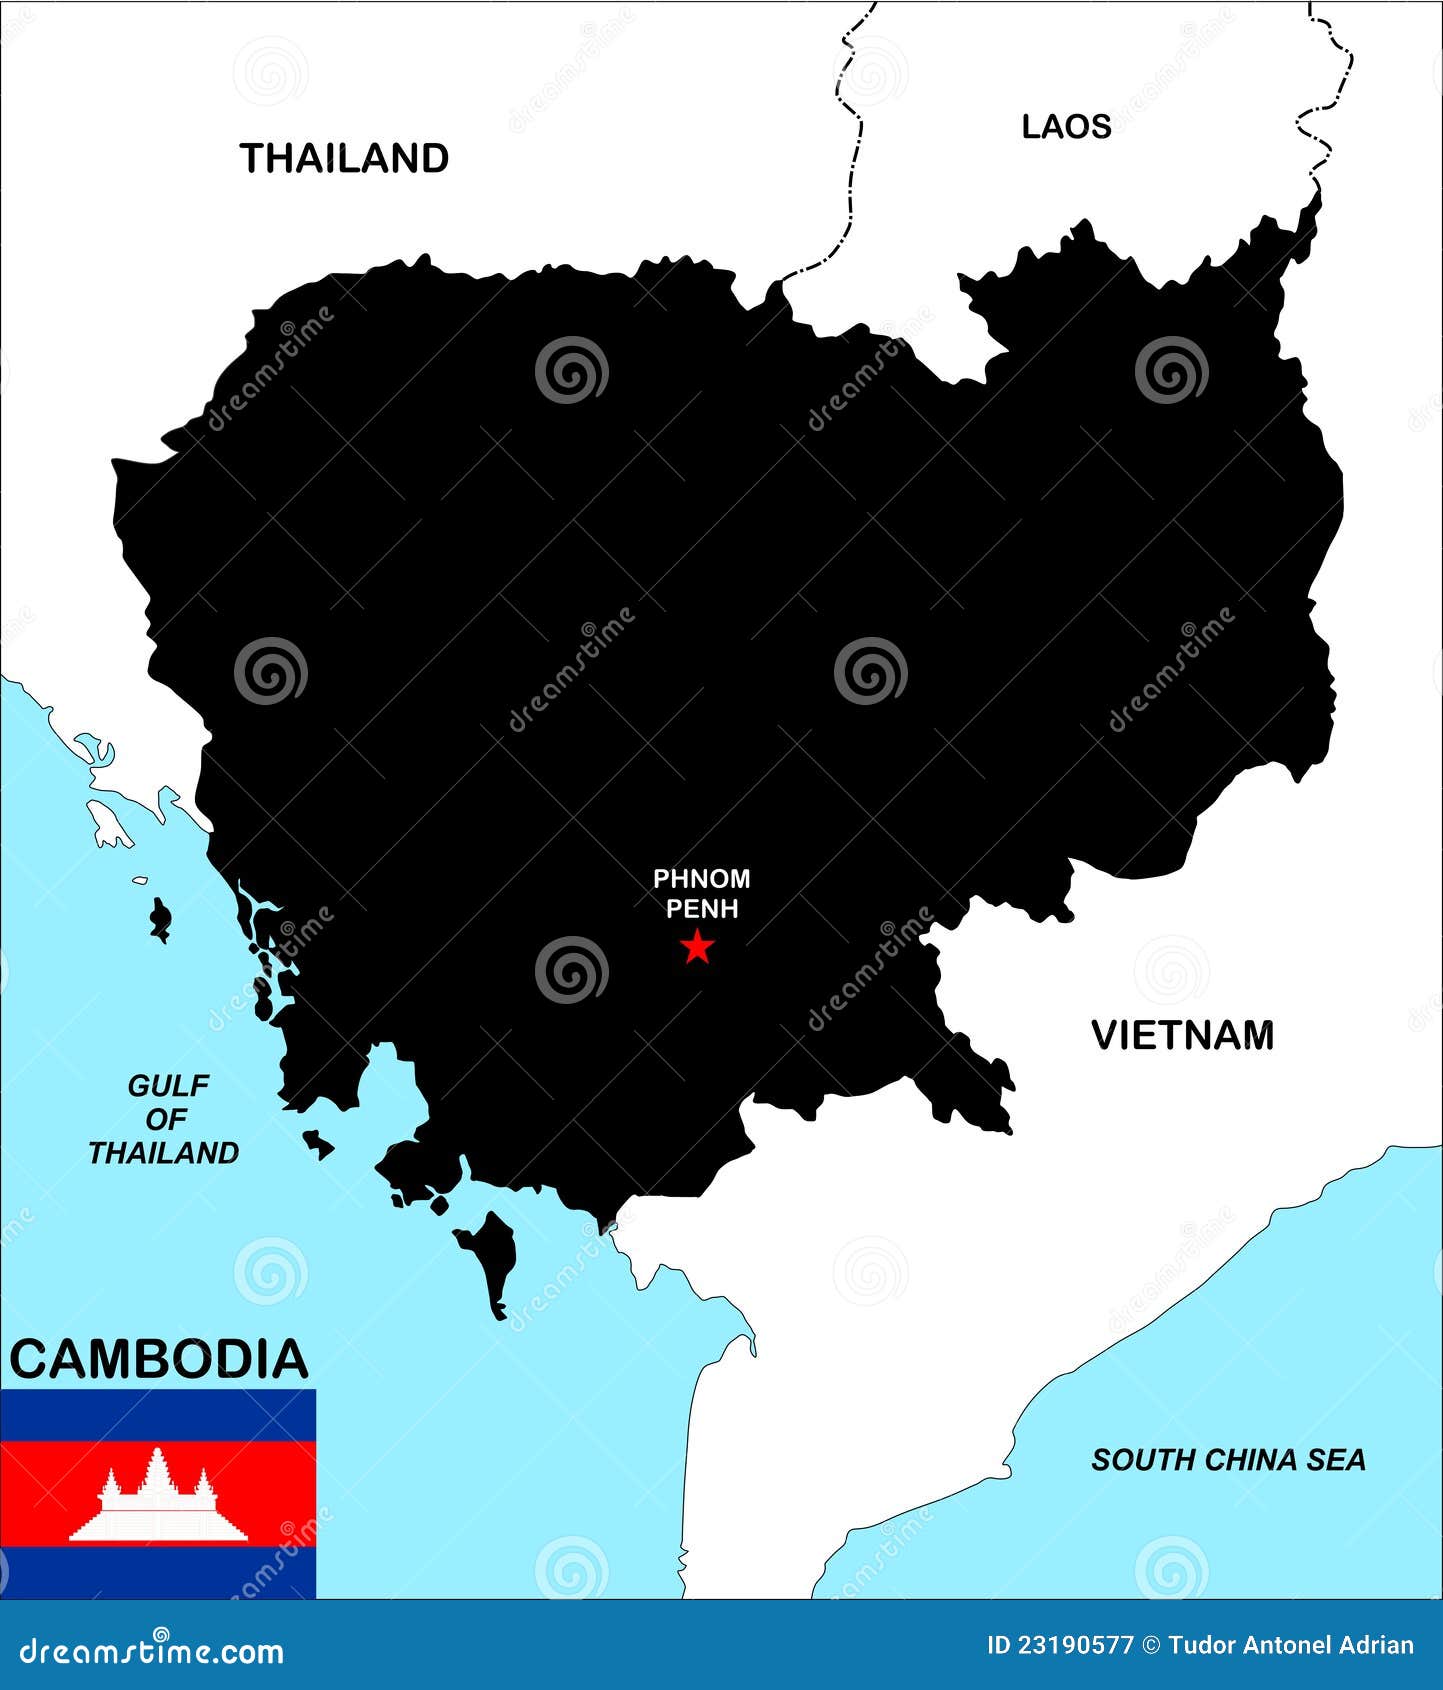 clipart map of cambodia - photo #21